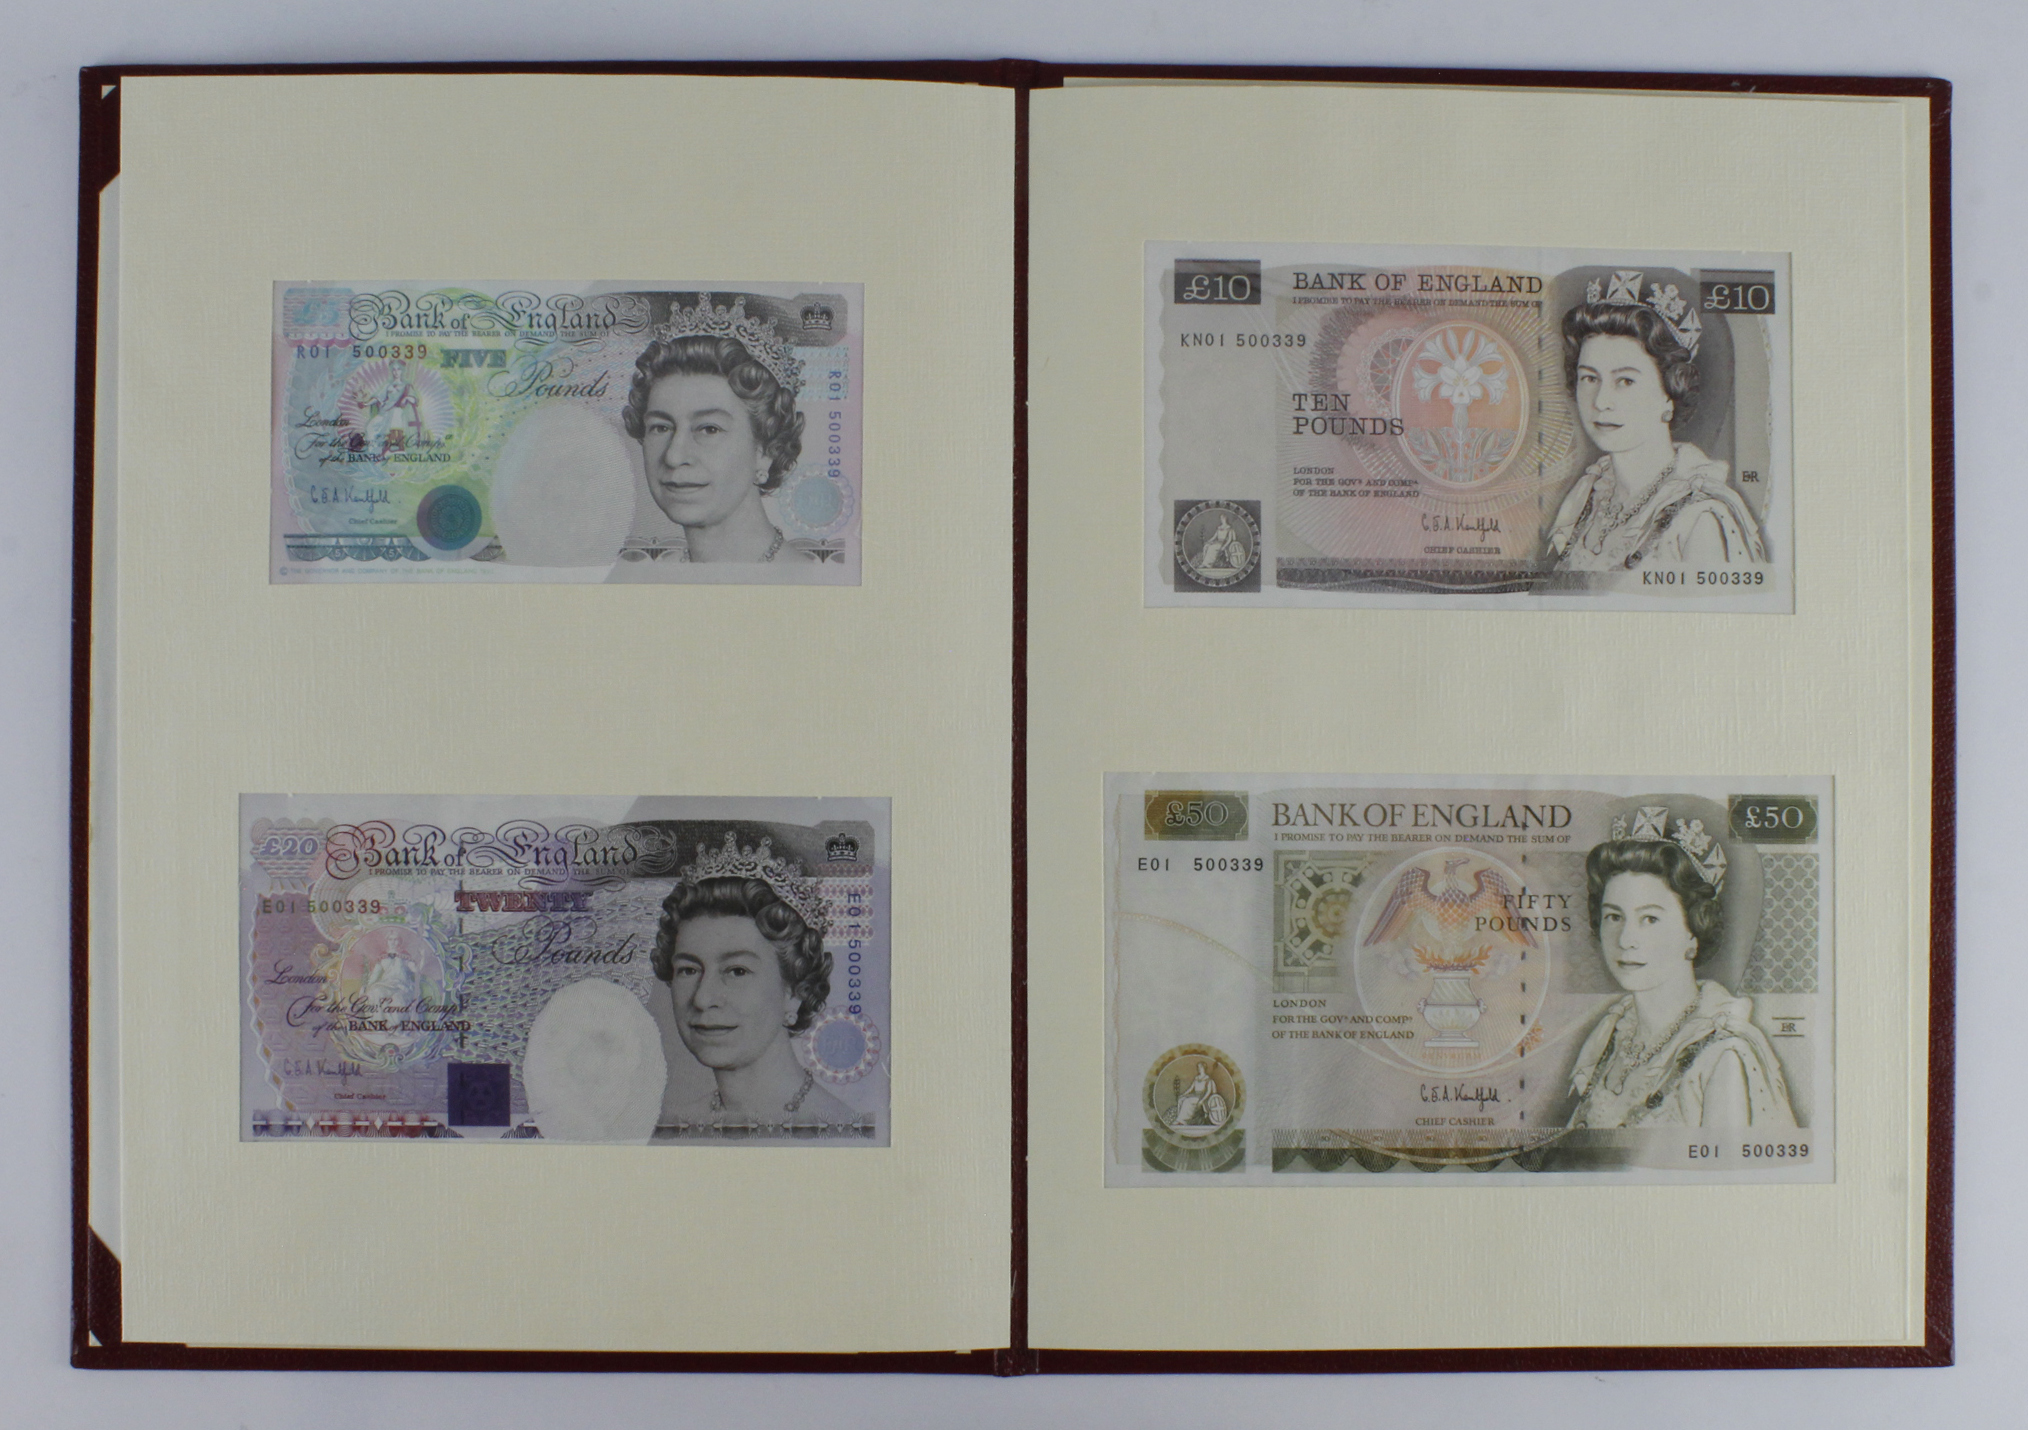 Debden set C106 Firsts, a set of 4 notes issued 1993 and signed Kentfield, all FIRST RUN notes - Image 2 of 3